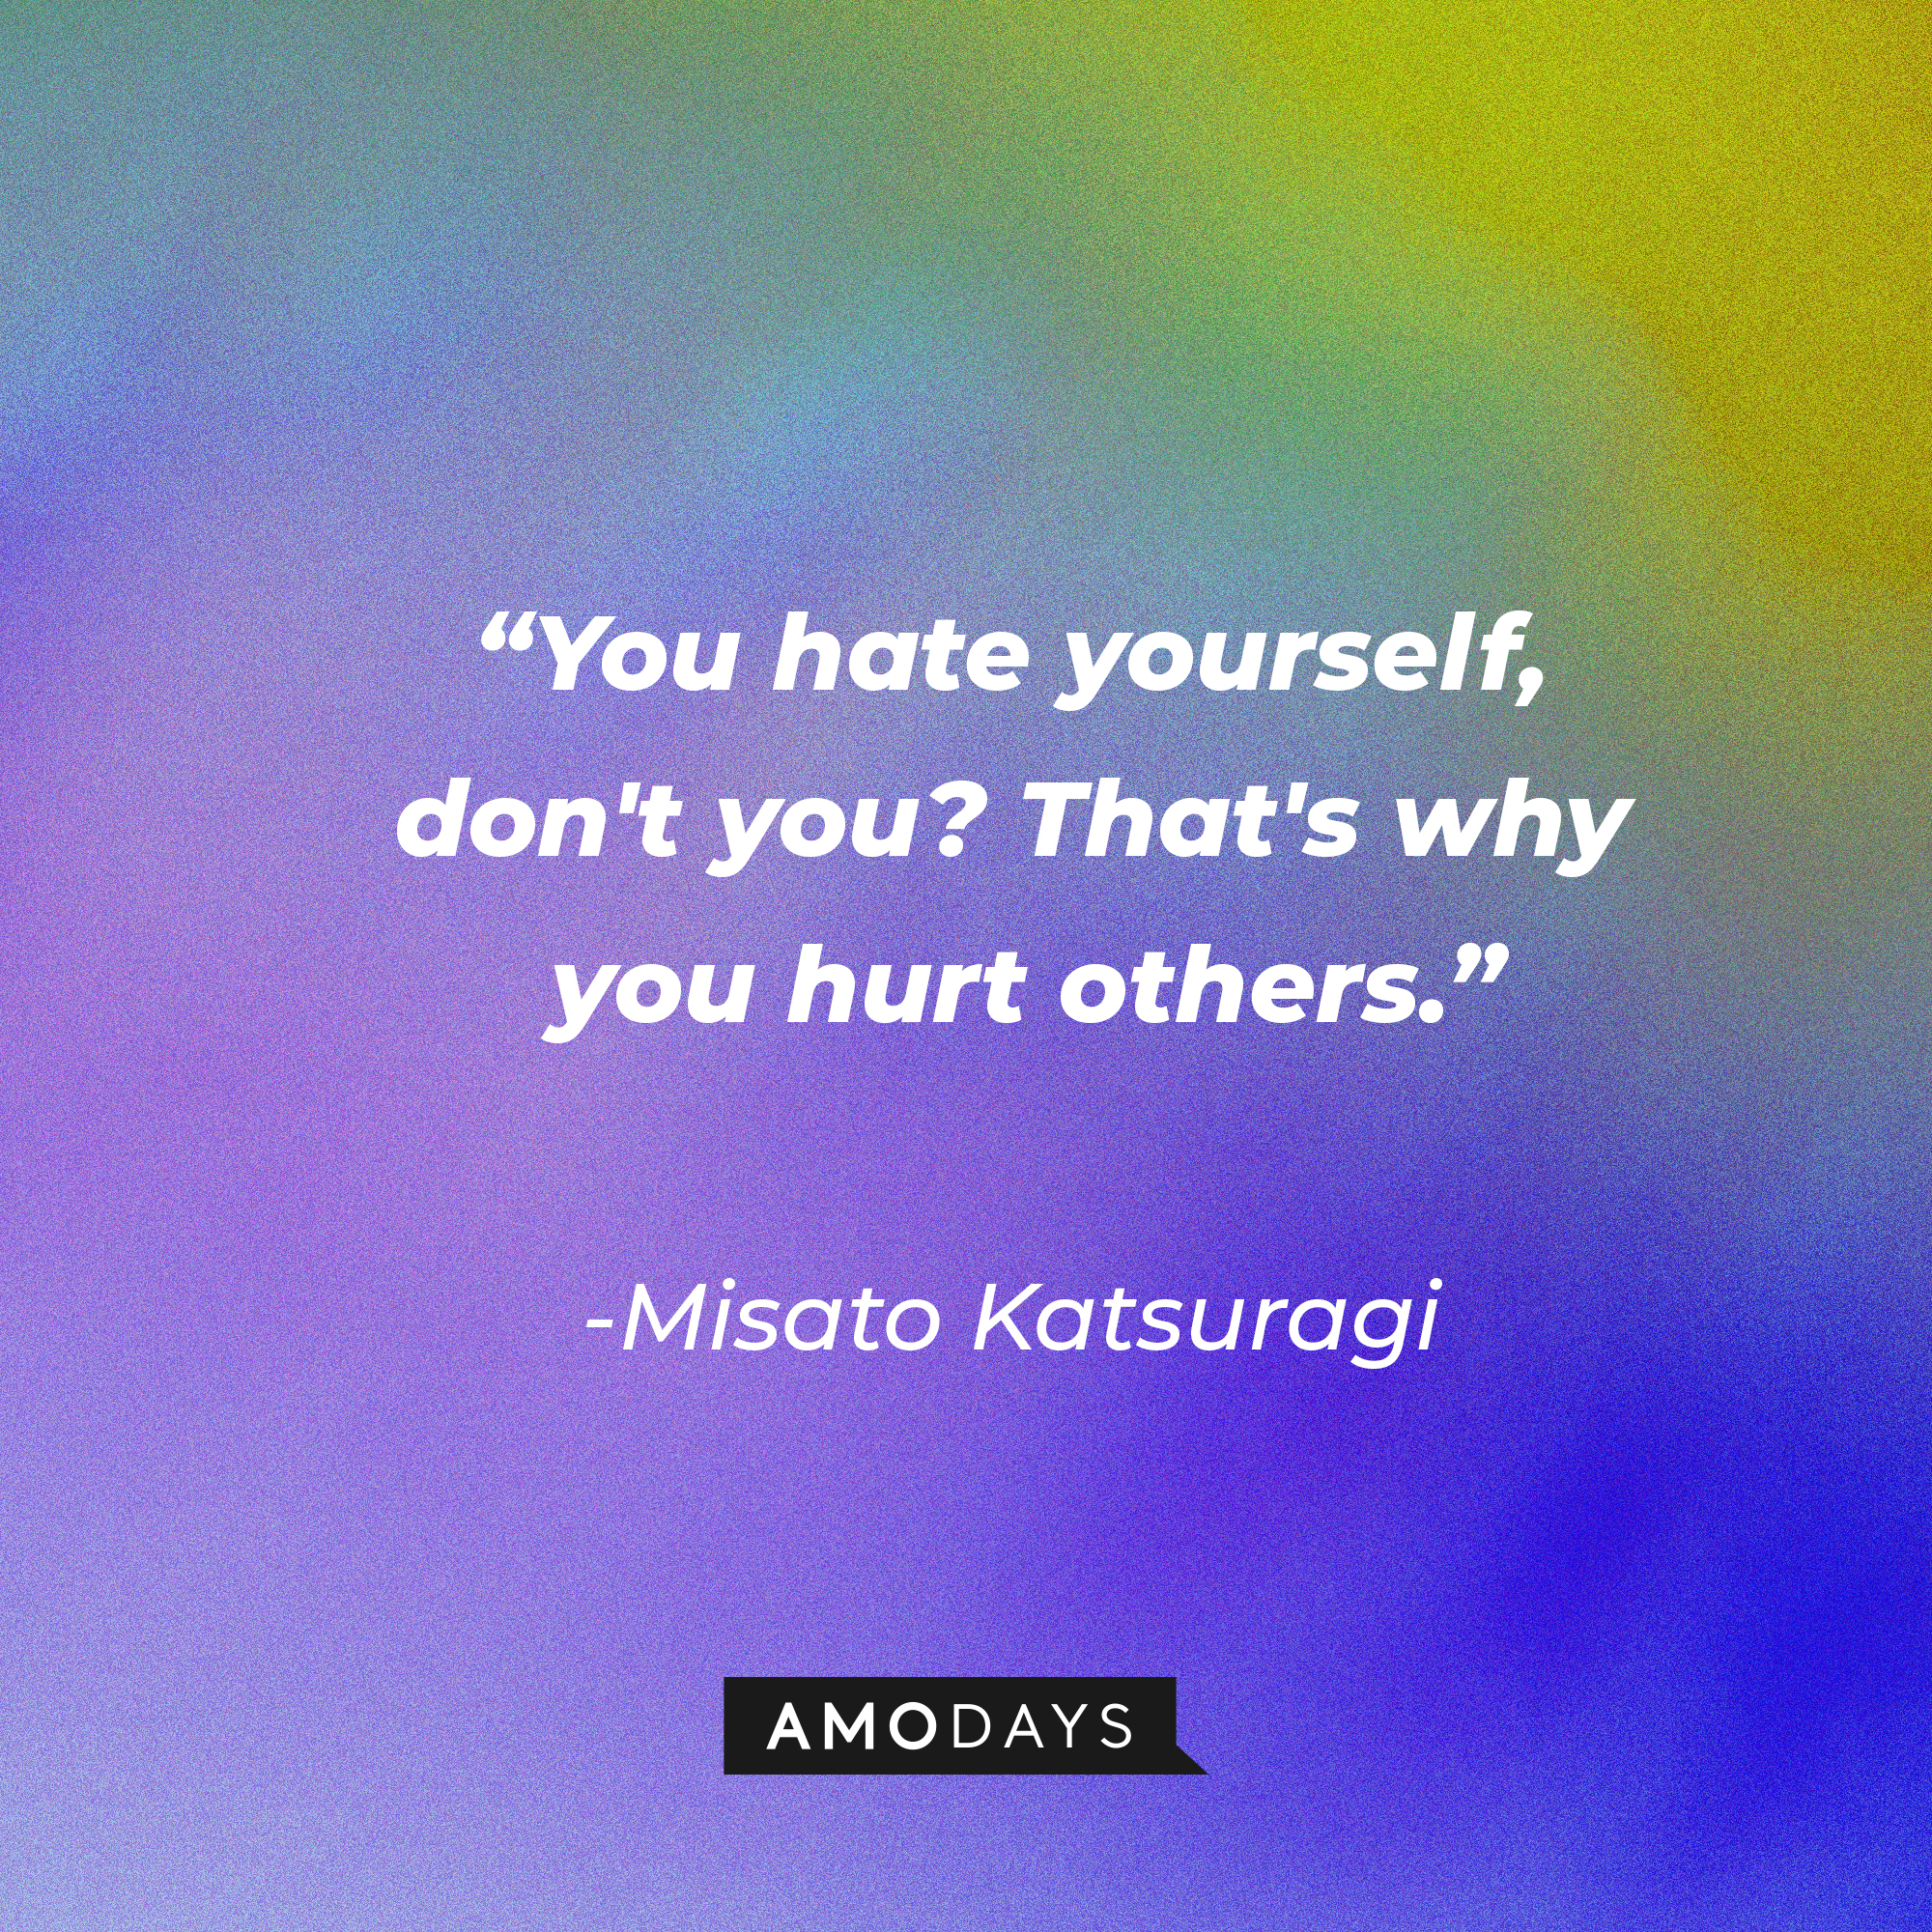 Misato Katsuragi’s quote: “You hate yourself, don't you? That's why you hurt others.” | Source: AmoDays